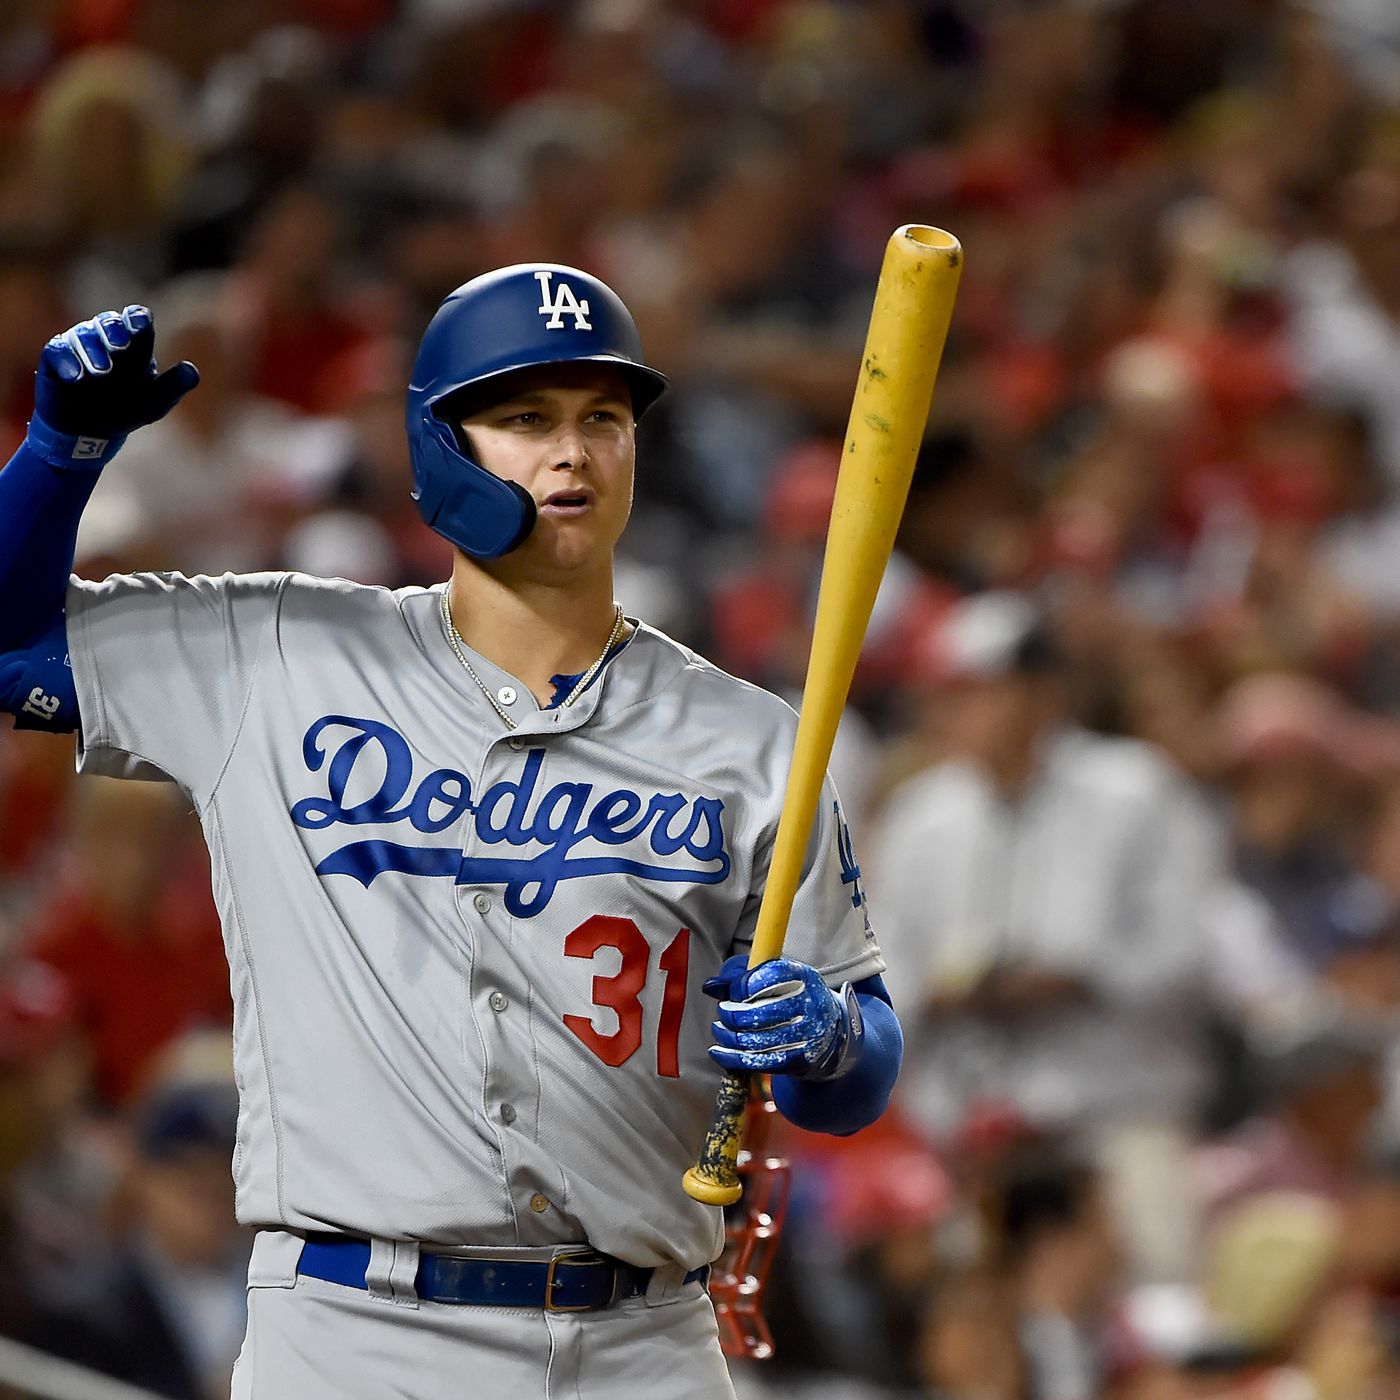 MLB trade rumors: Should the Tigers trade for Joc Pederson? - Bless You Boys